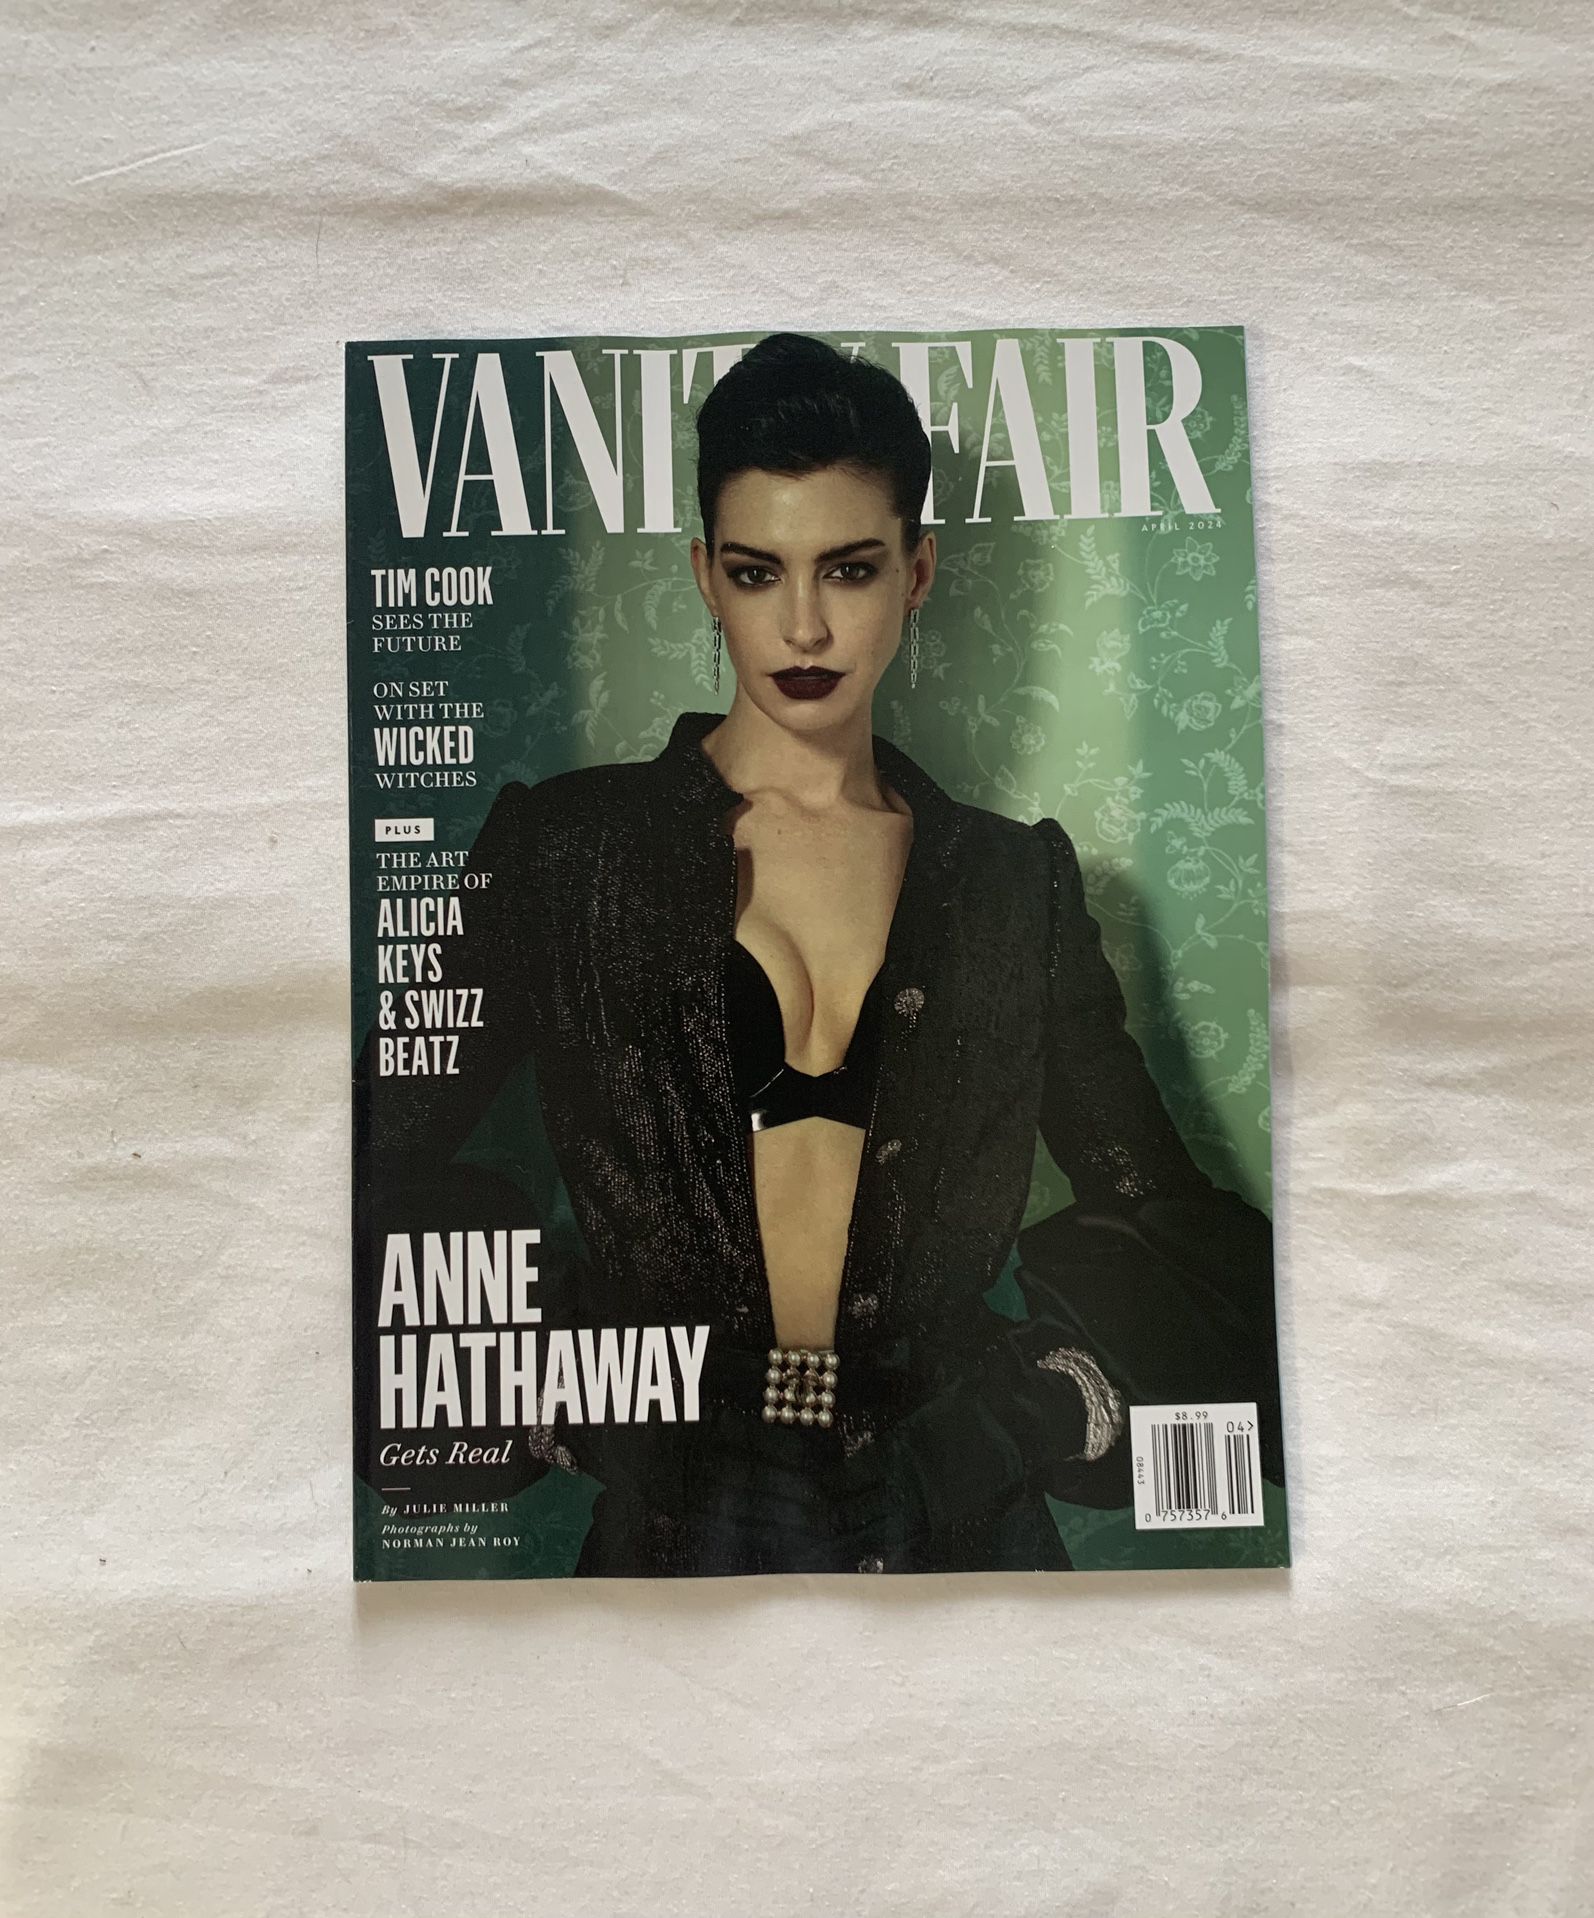 Vanity Fair Anna Hathaway “Gets Real” Issue April 2024 Magazine